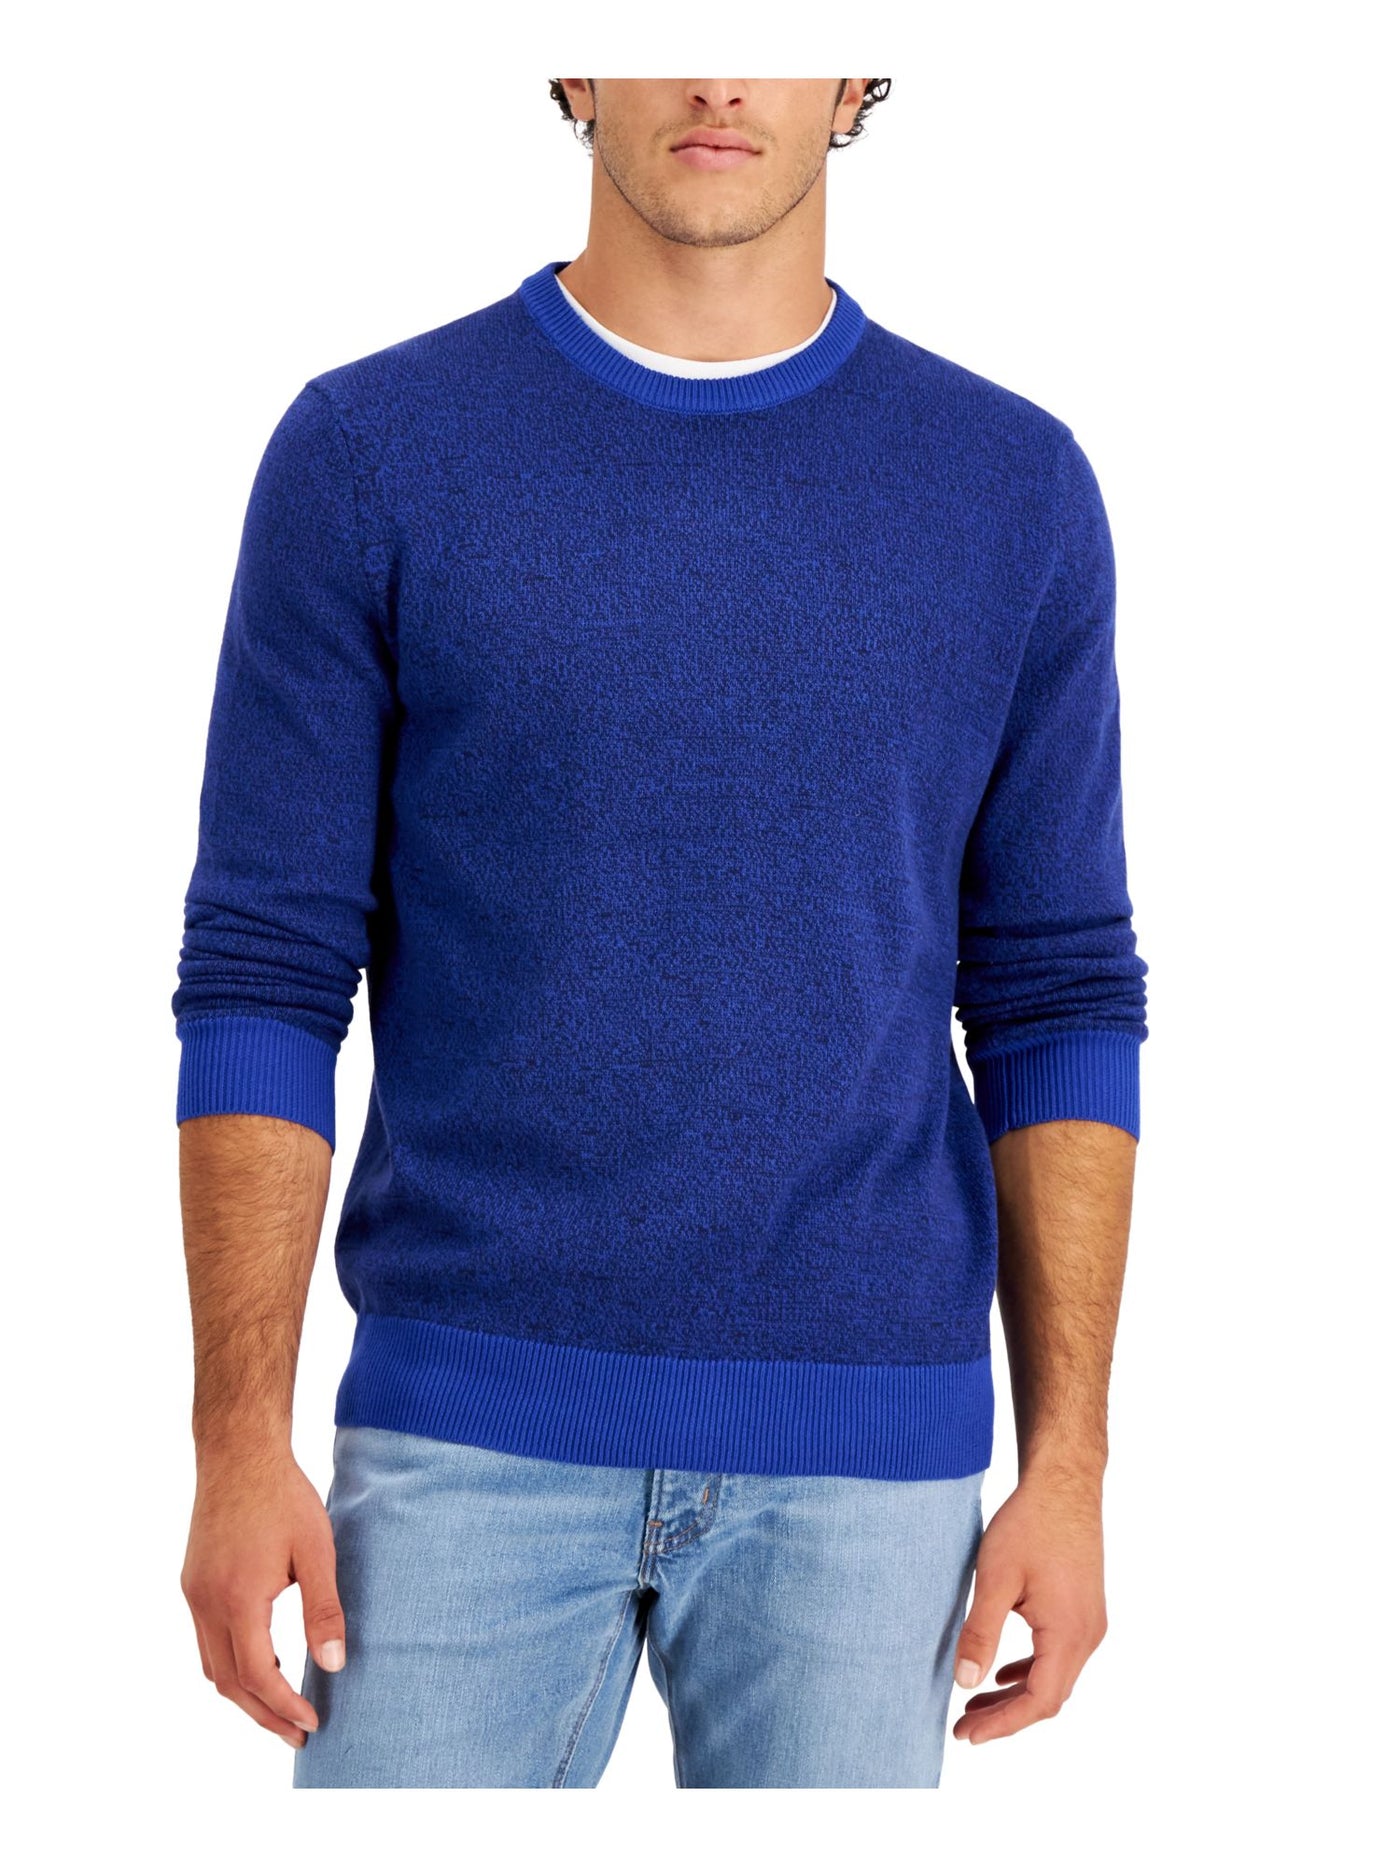 CLUBROOM Mens Navy Long Sleeve Crew Neck Classic Fit Pullover Sweater XXL